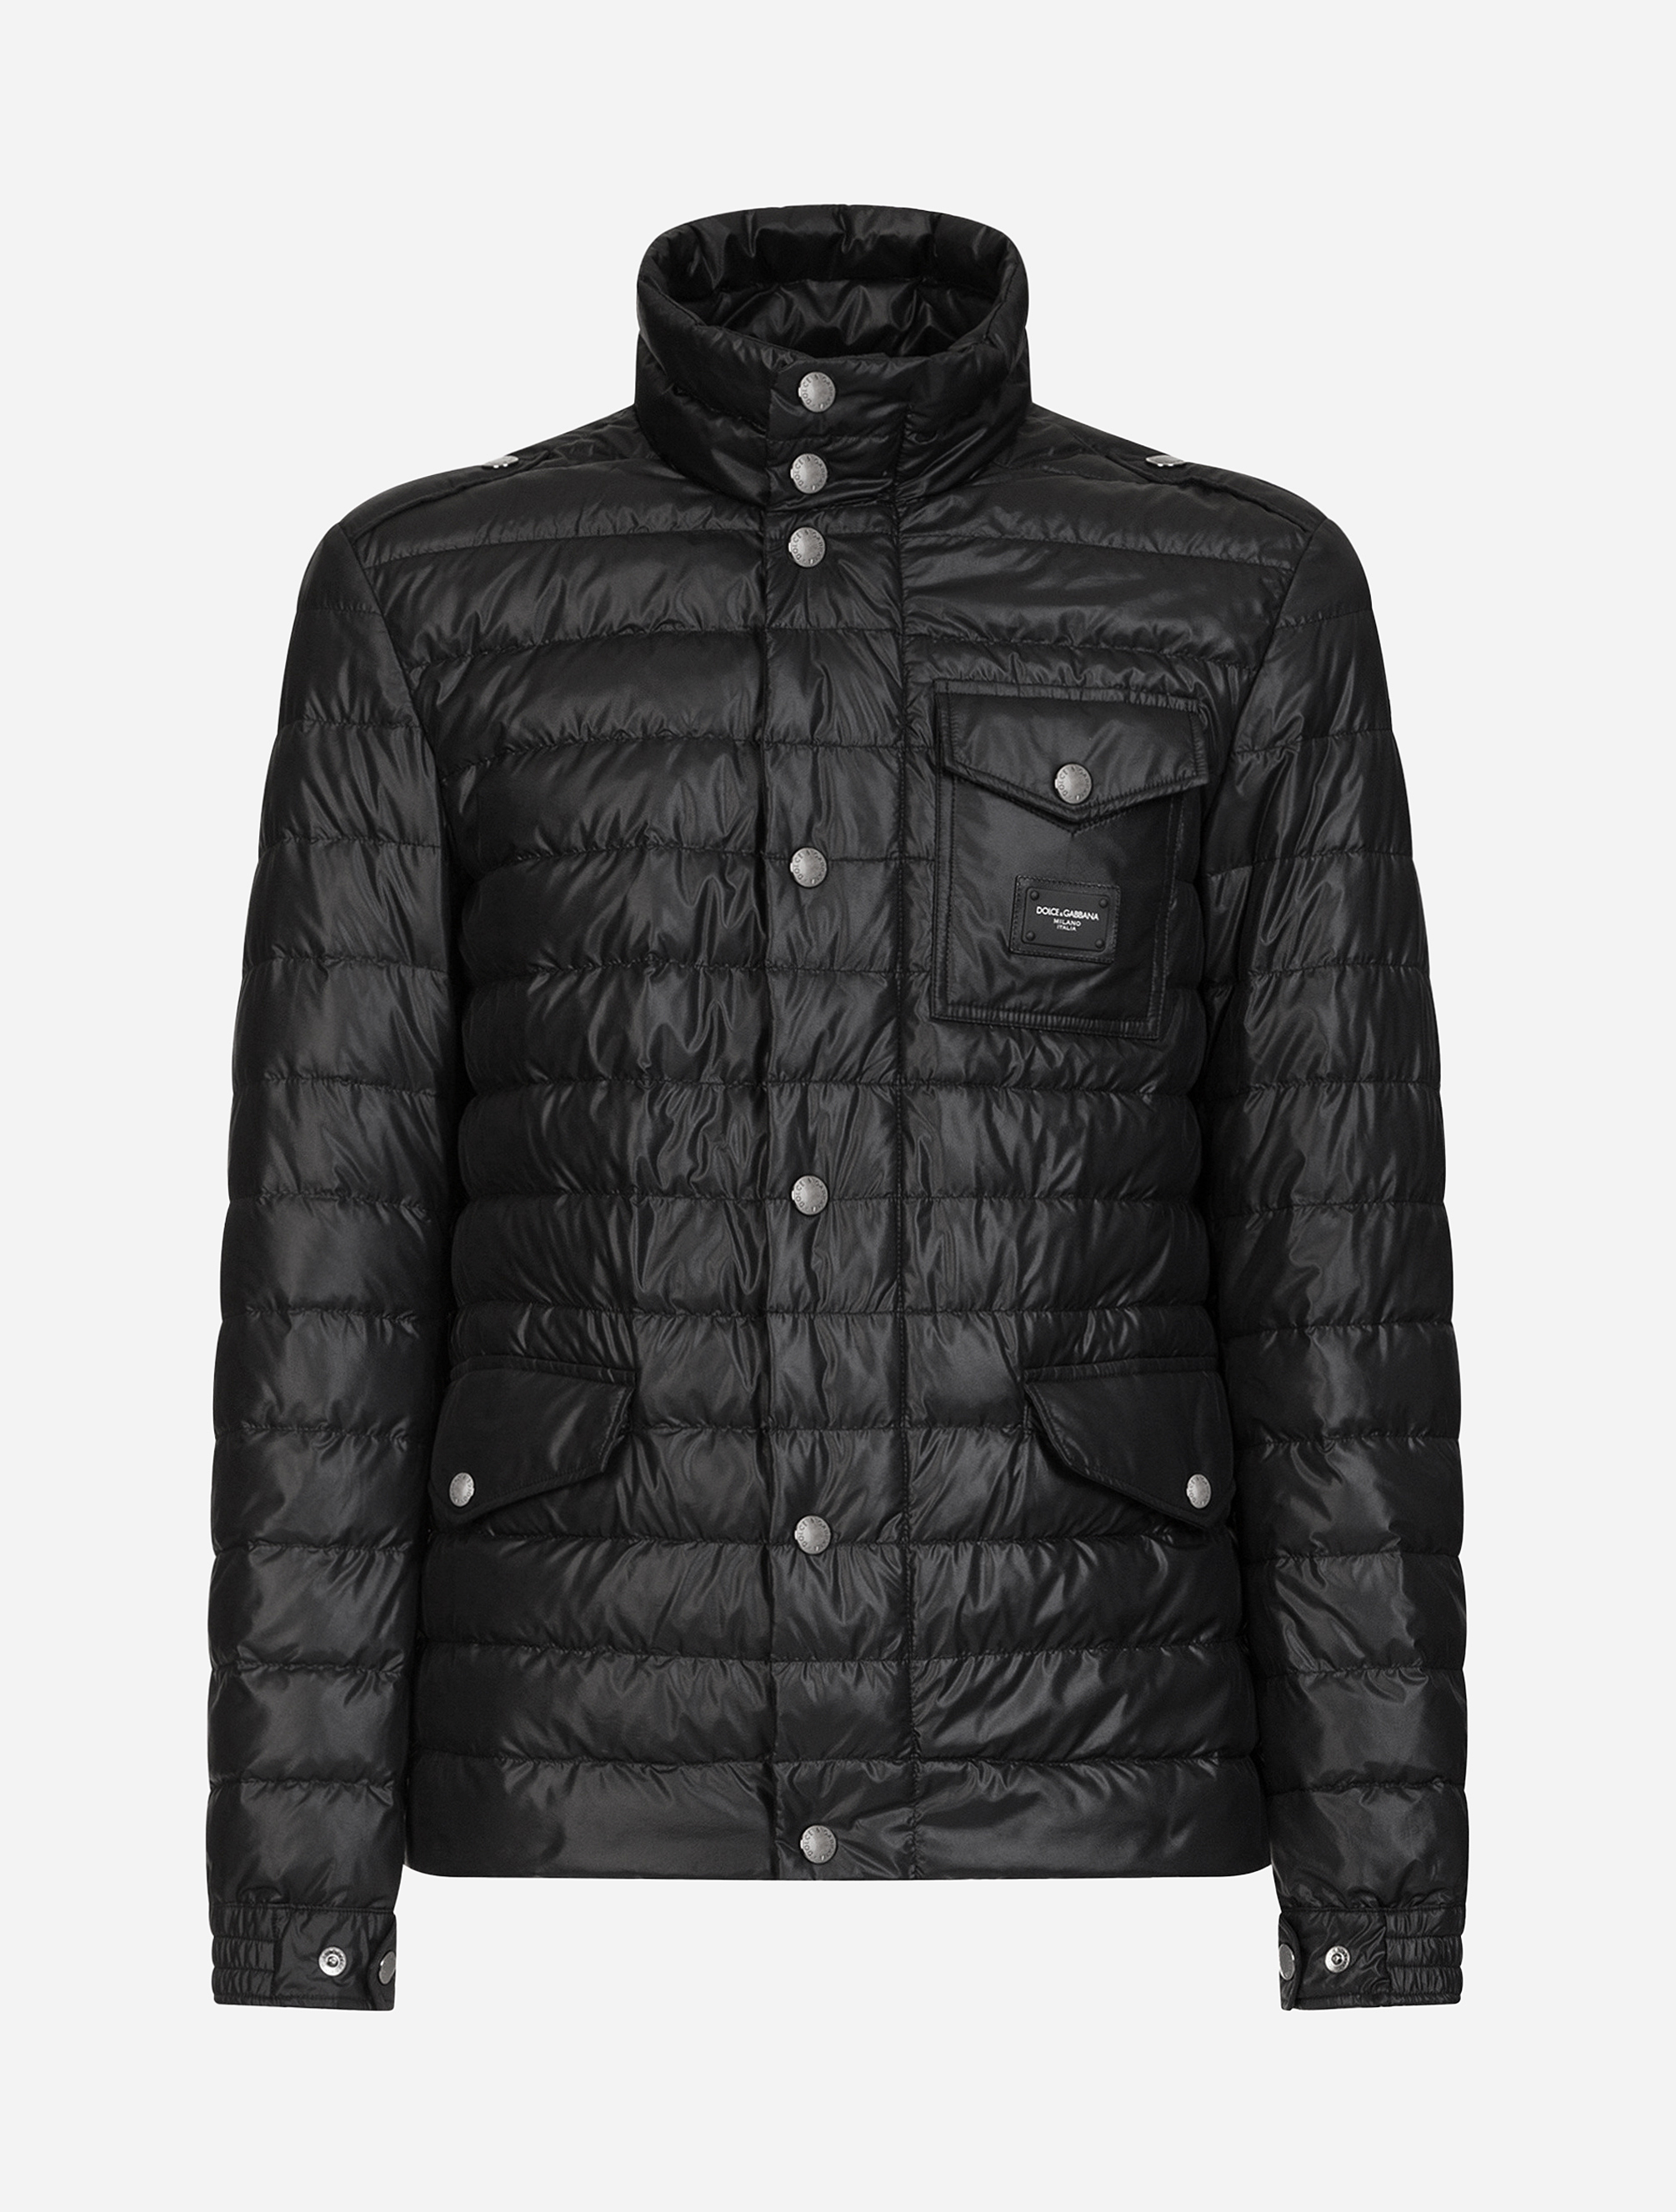 DOLCE & GABBANA QUILTED NYLON JACKET WITH BRANDED PLATE